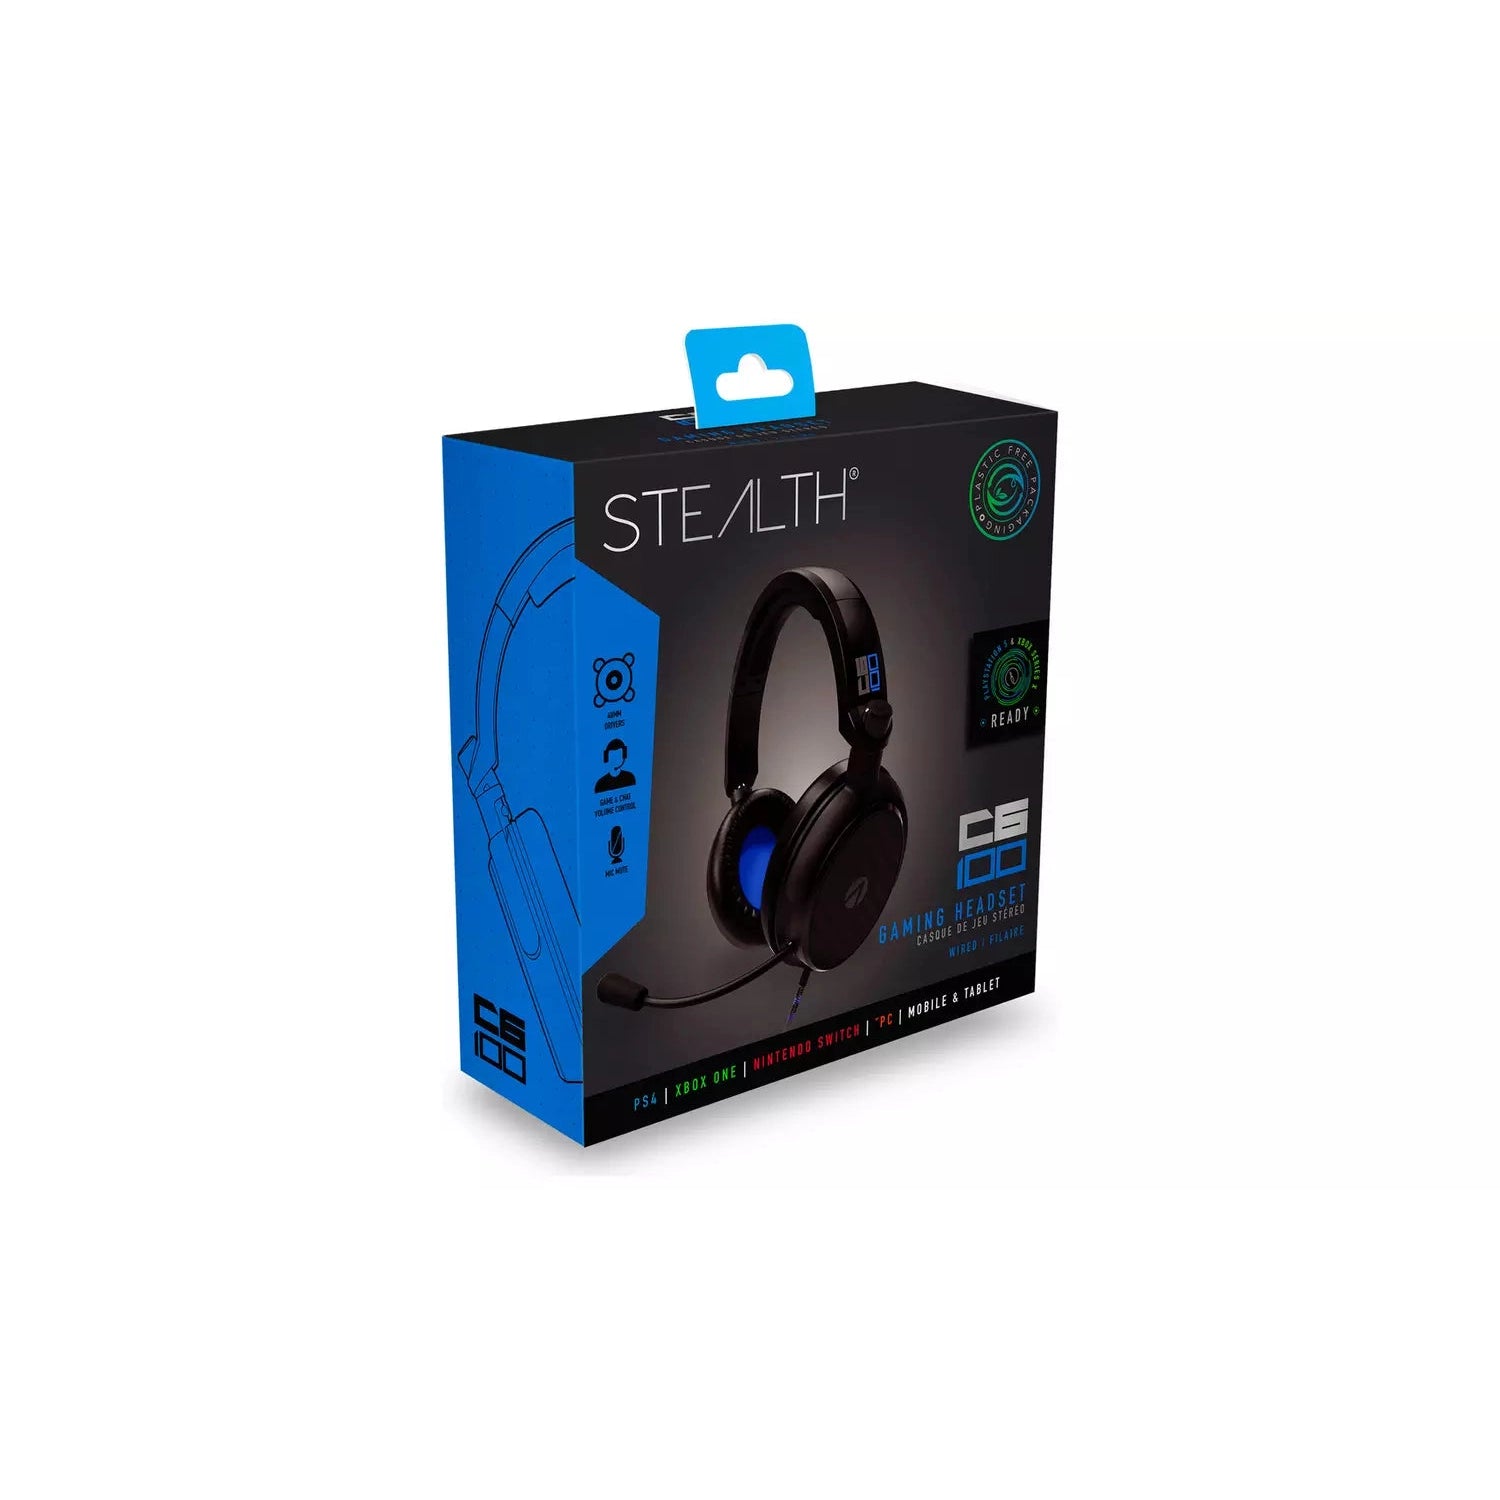 Stand Headset Gaming Stock C6-100 Must Stealth Go and |